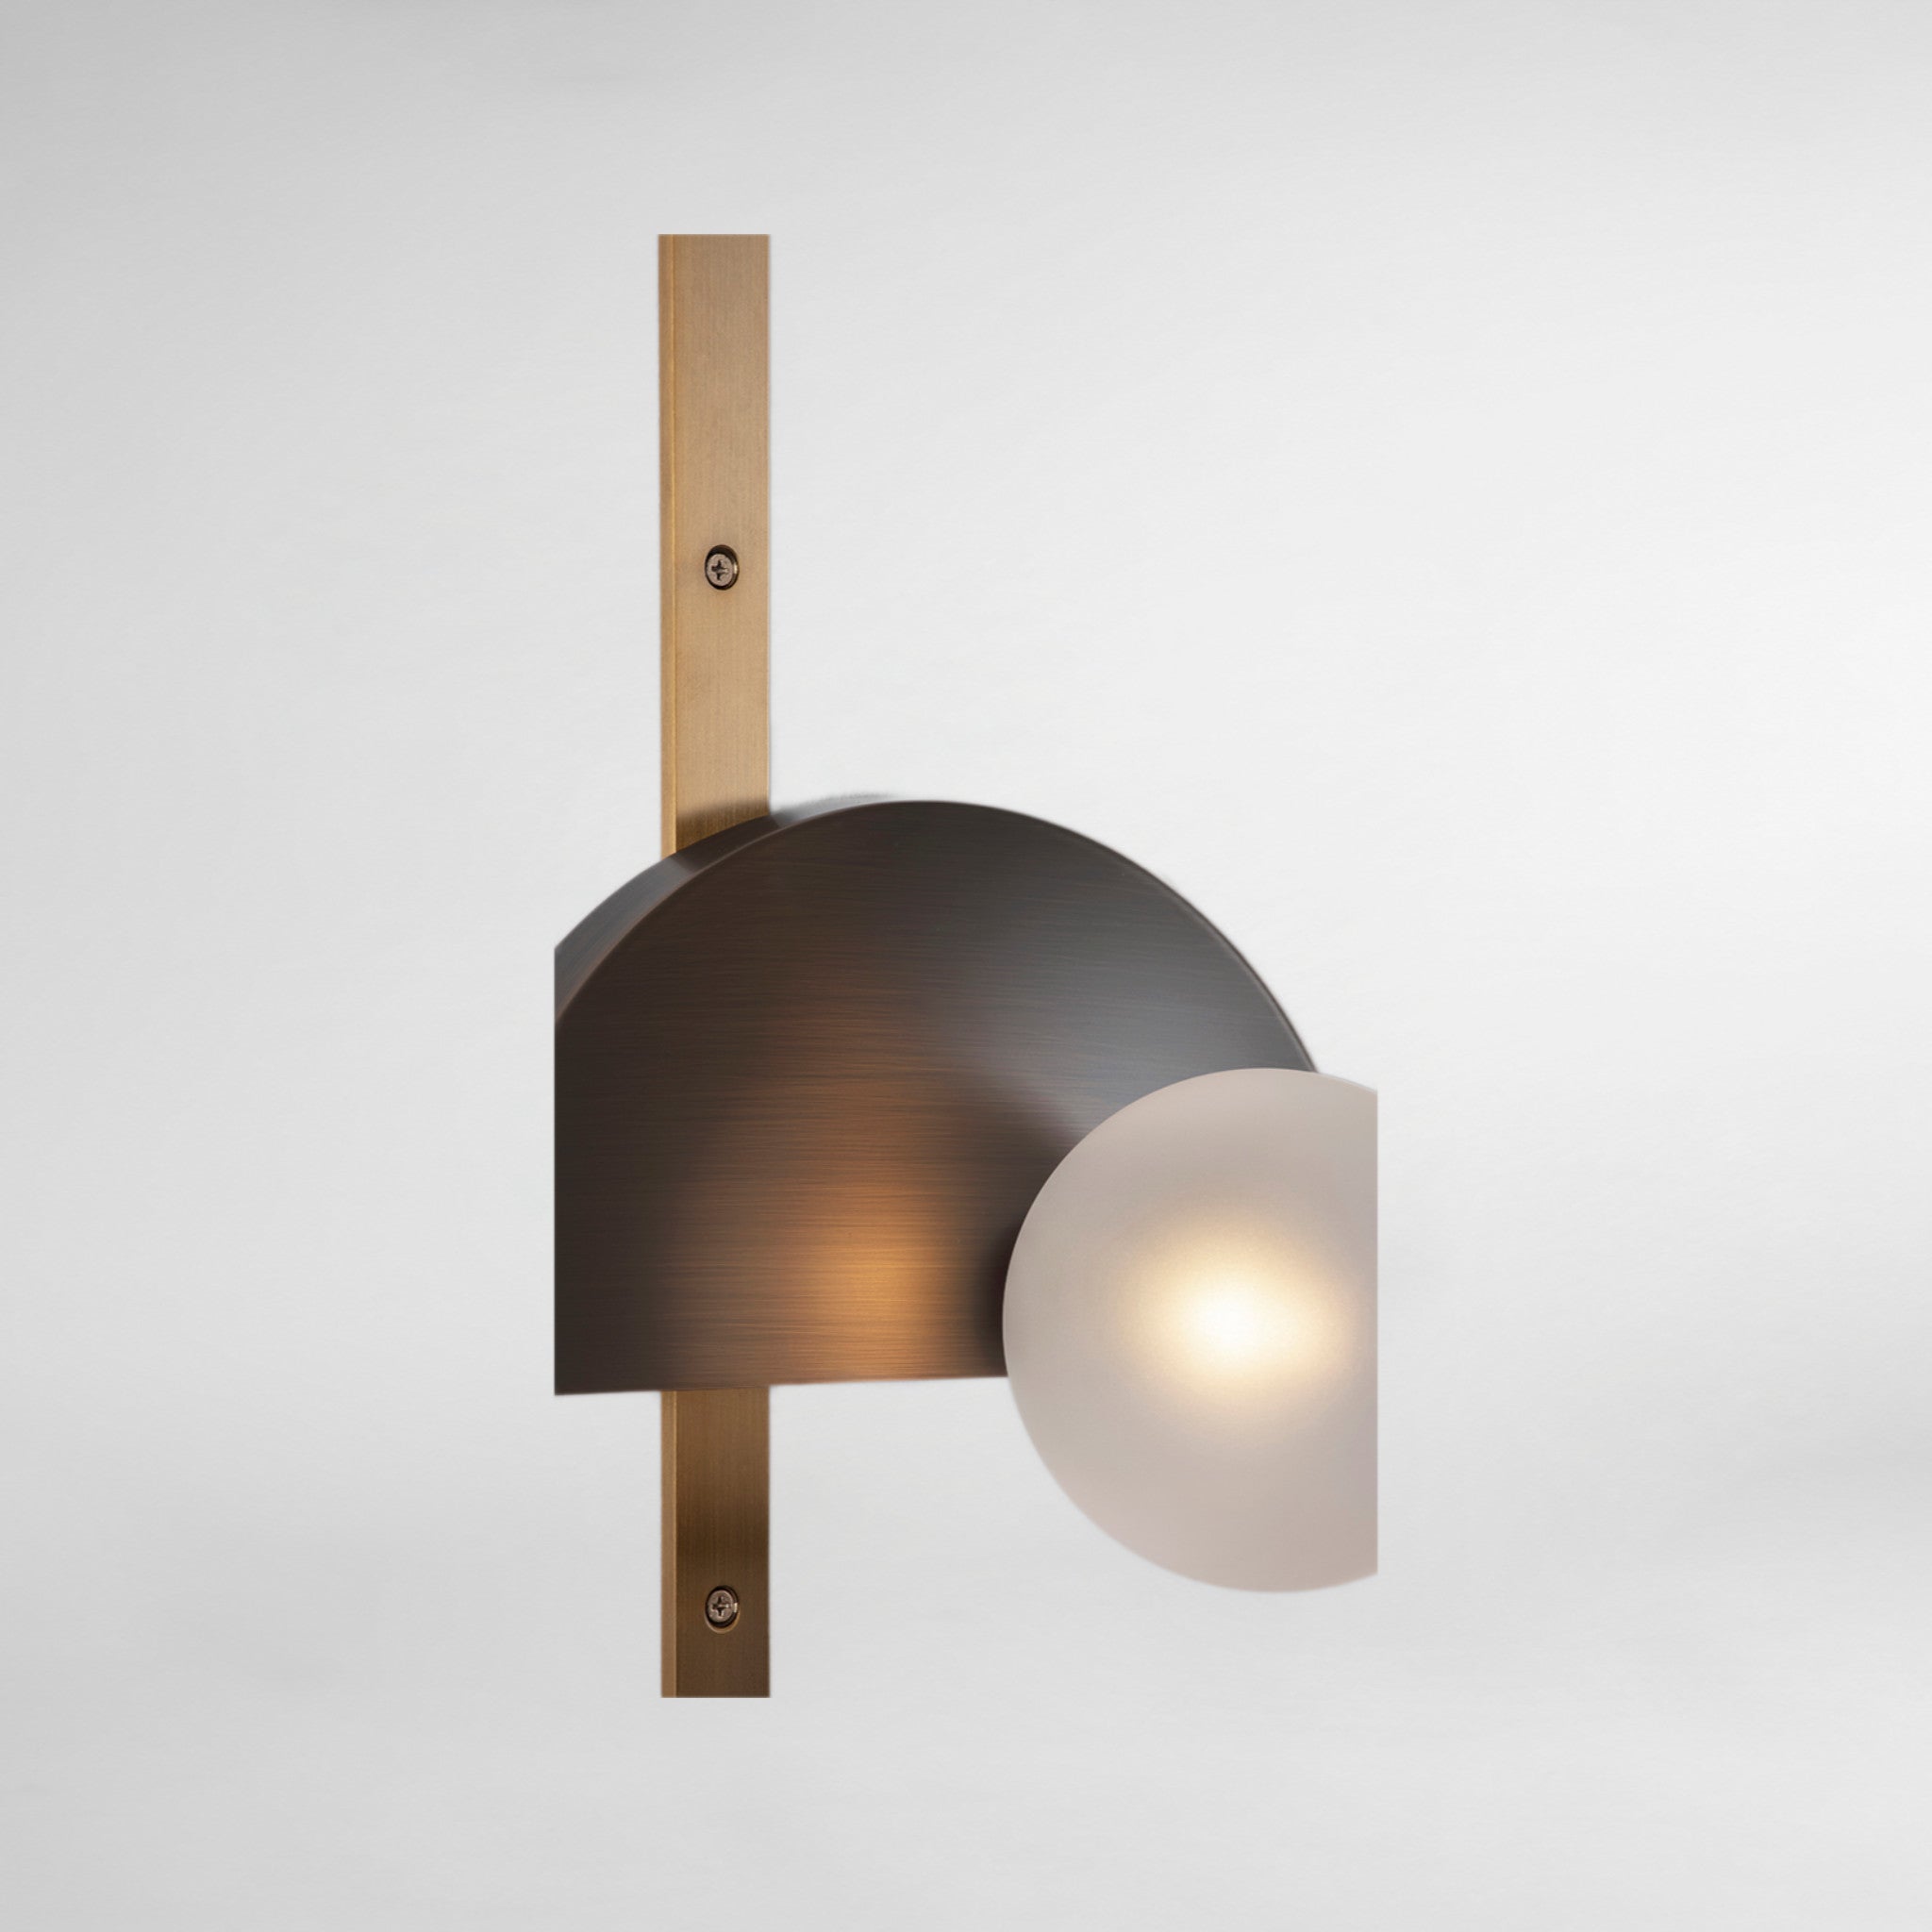 Exhibition Wall Light